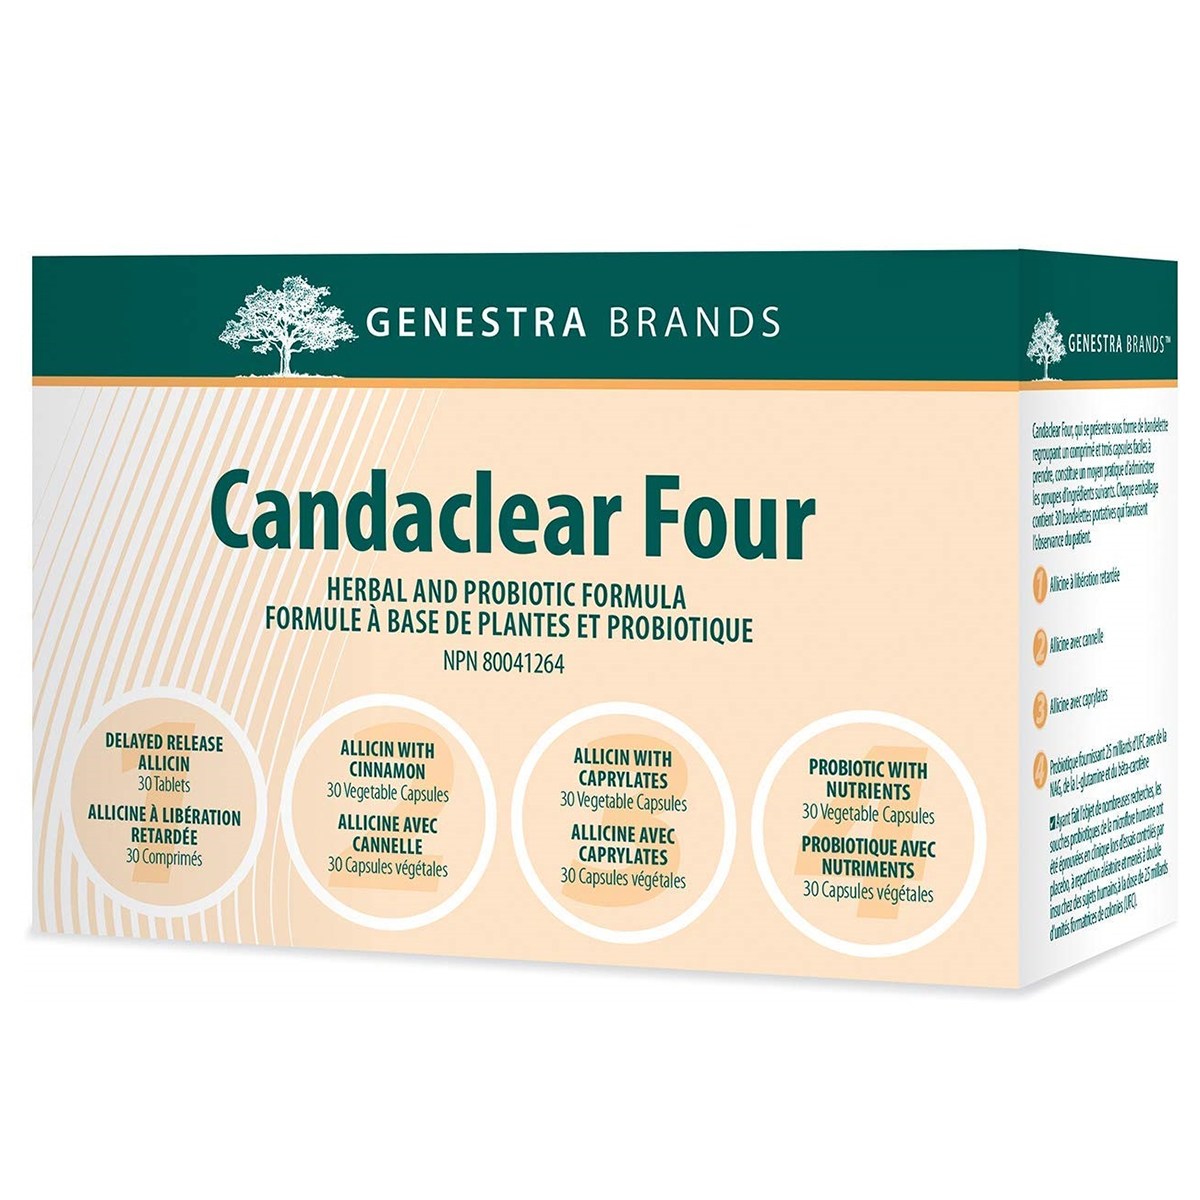 Candaclear Four